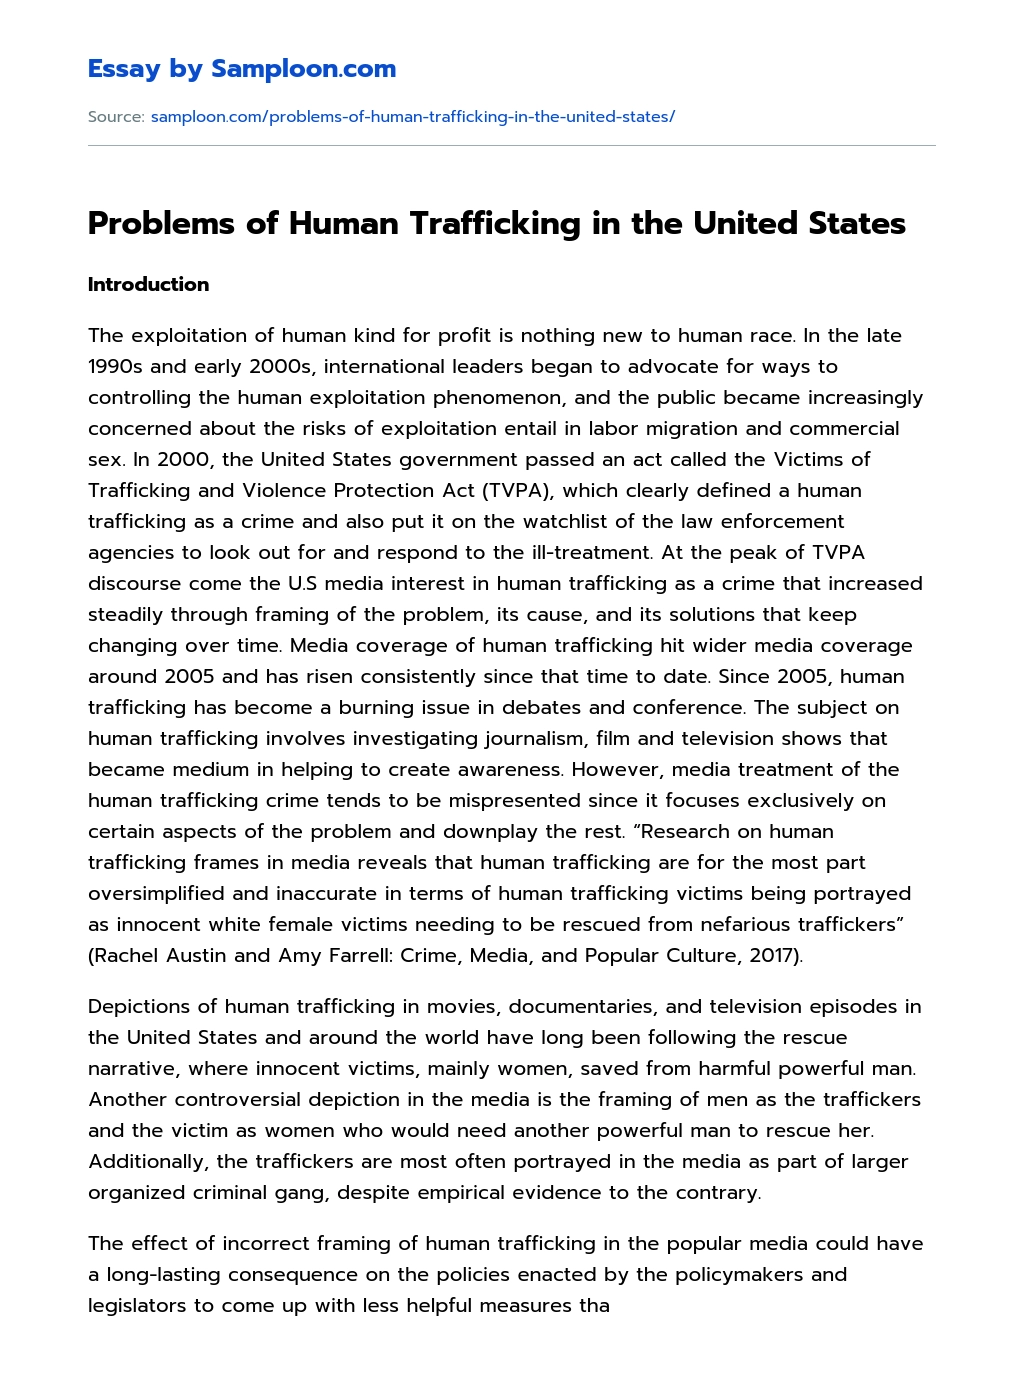 Problems of Human Trafficking in the United States essay